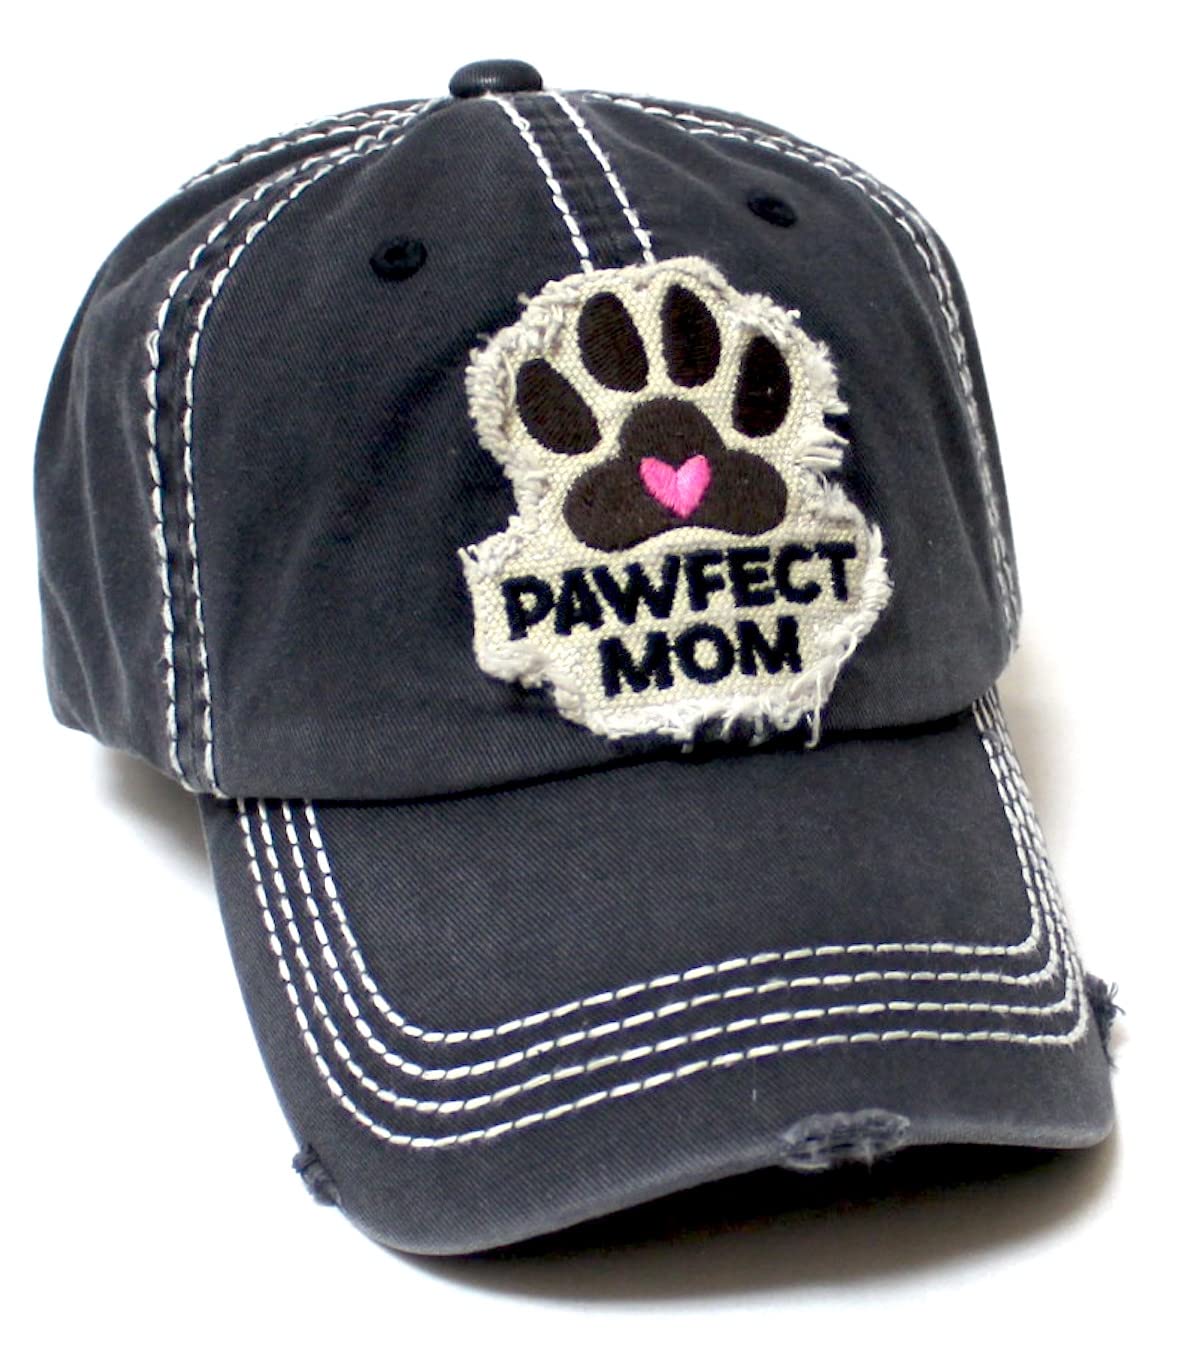 Fur Mom Ballcap PAWFECT MOM Dog Love Patch Embroidery Hat, Black